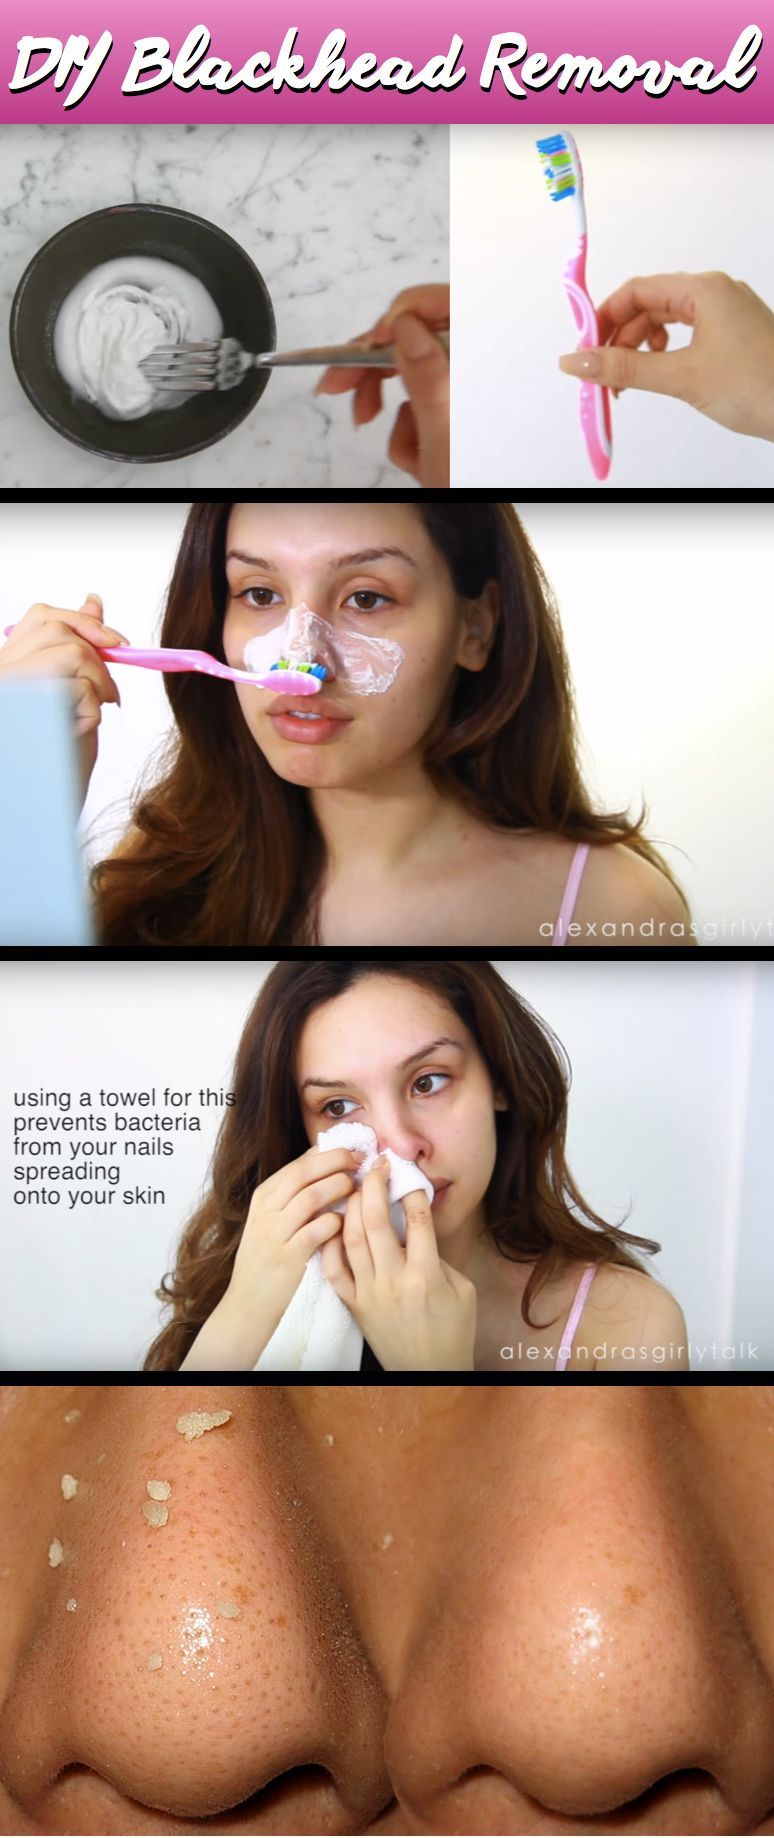 How She Gets Rid Of Her Blackheads With a DIY Mask and Toothbrush is Simply Amazing -   24 diy face black heads
 ideas